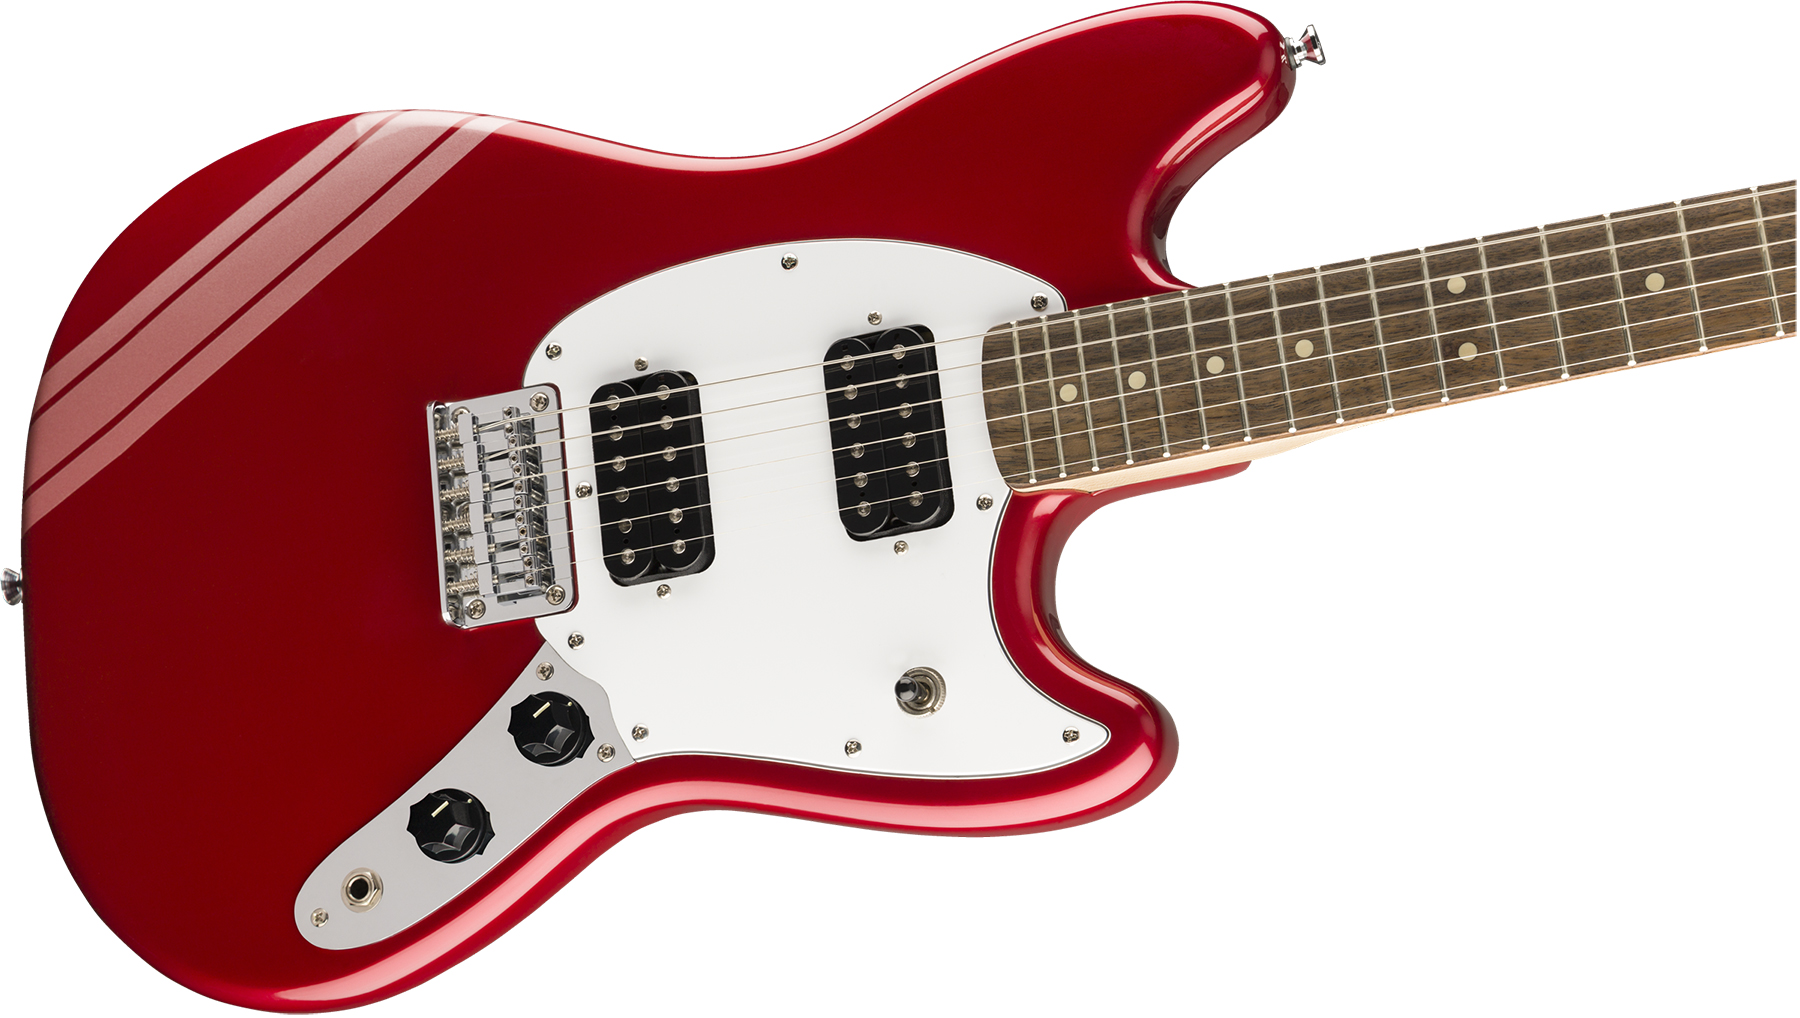 Squier Mustang Bullet Competition Hh Fsr Ht Lau - Candy Apple Red - Guitarra electrica retro rock - Variation 2